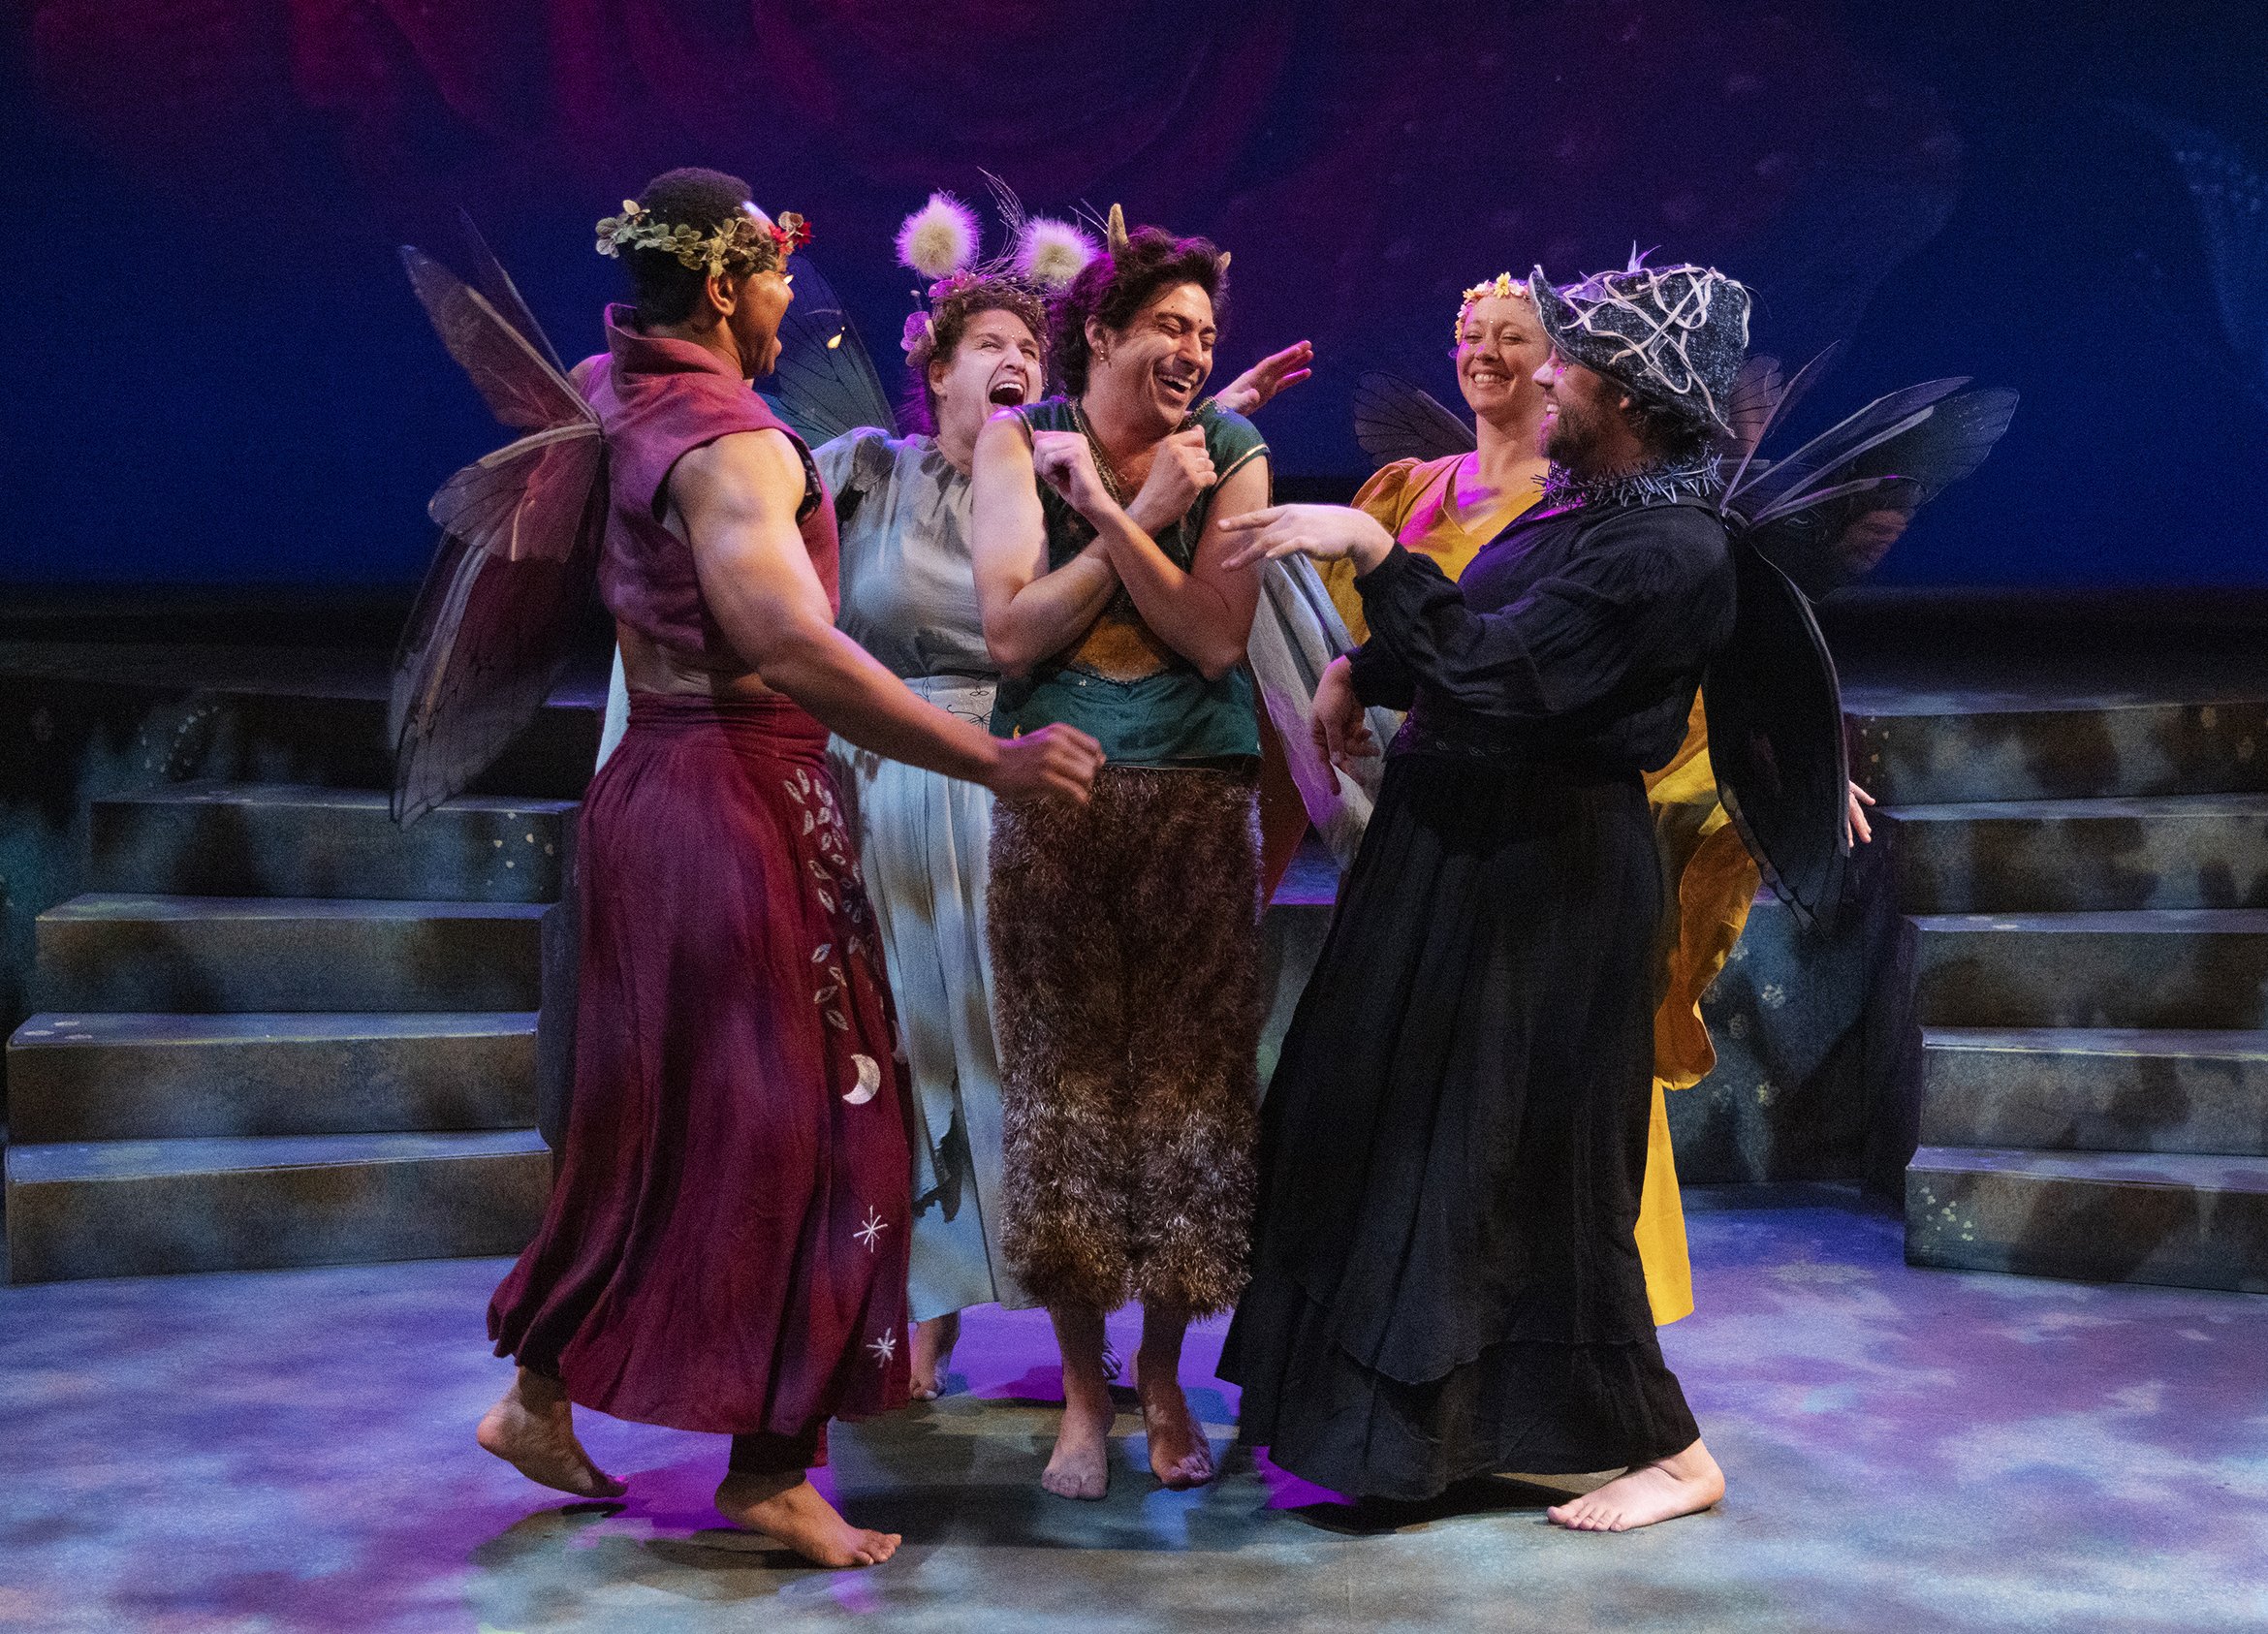 Puck and the Fairies. Jeffrey Baden as Peaseblossom, Julia Balestracci as Moth, Hunter Hnat as Puck, Kate Scally as Mustard Seed and Evan Werner as Cobweb. Photo by Tim Fuller.